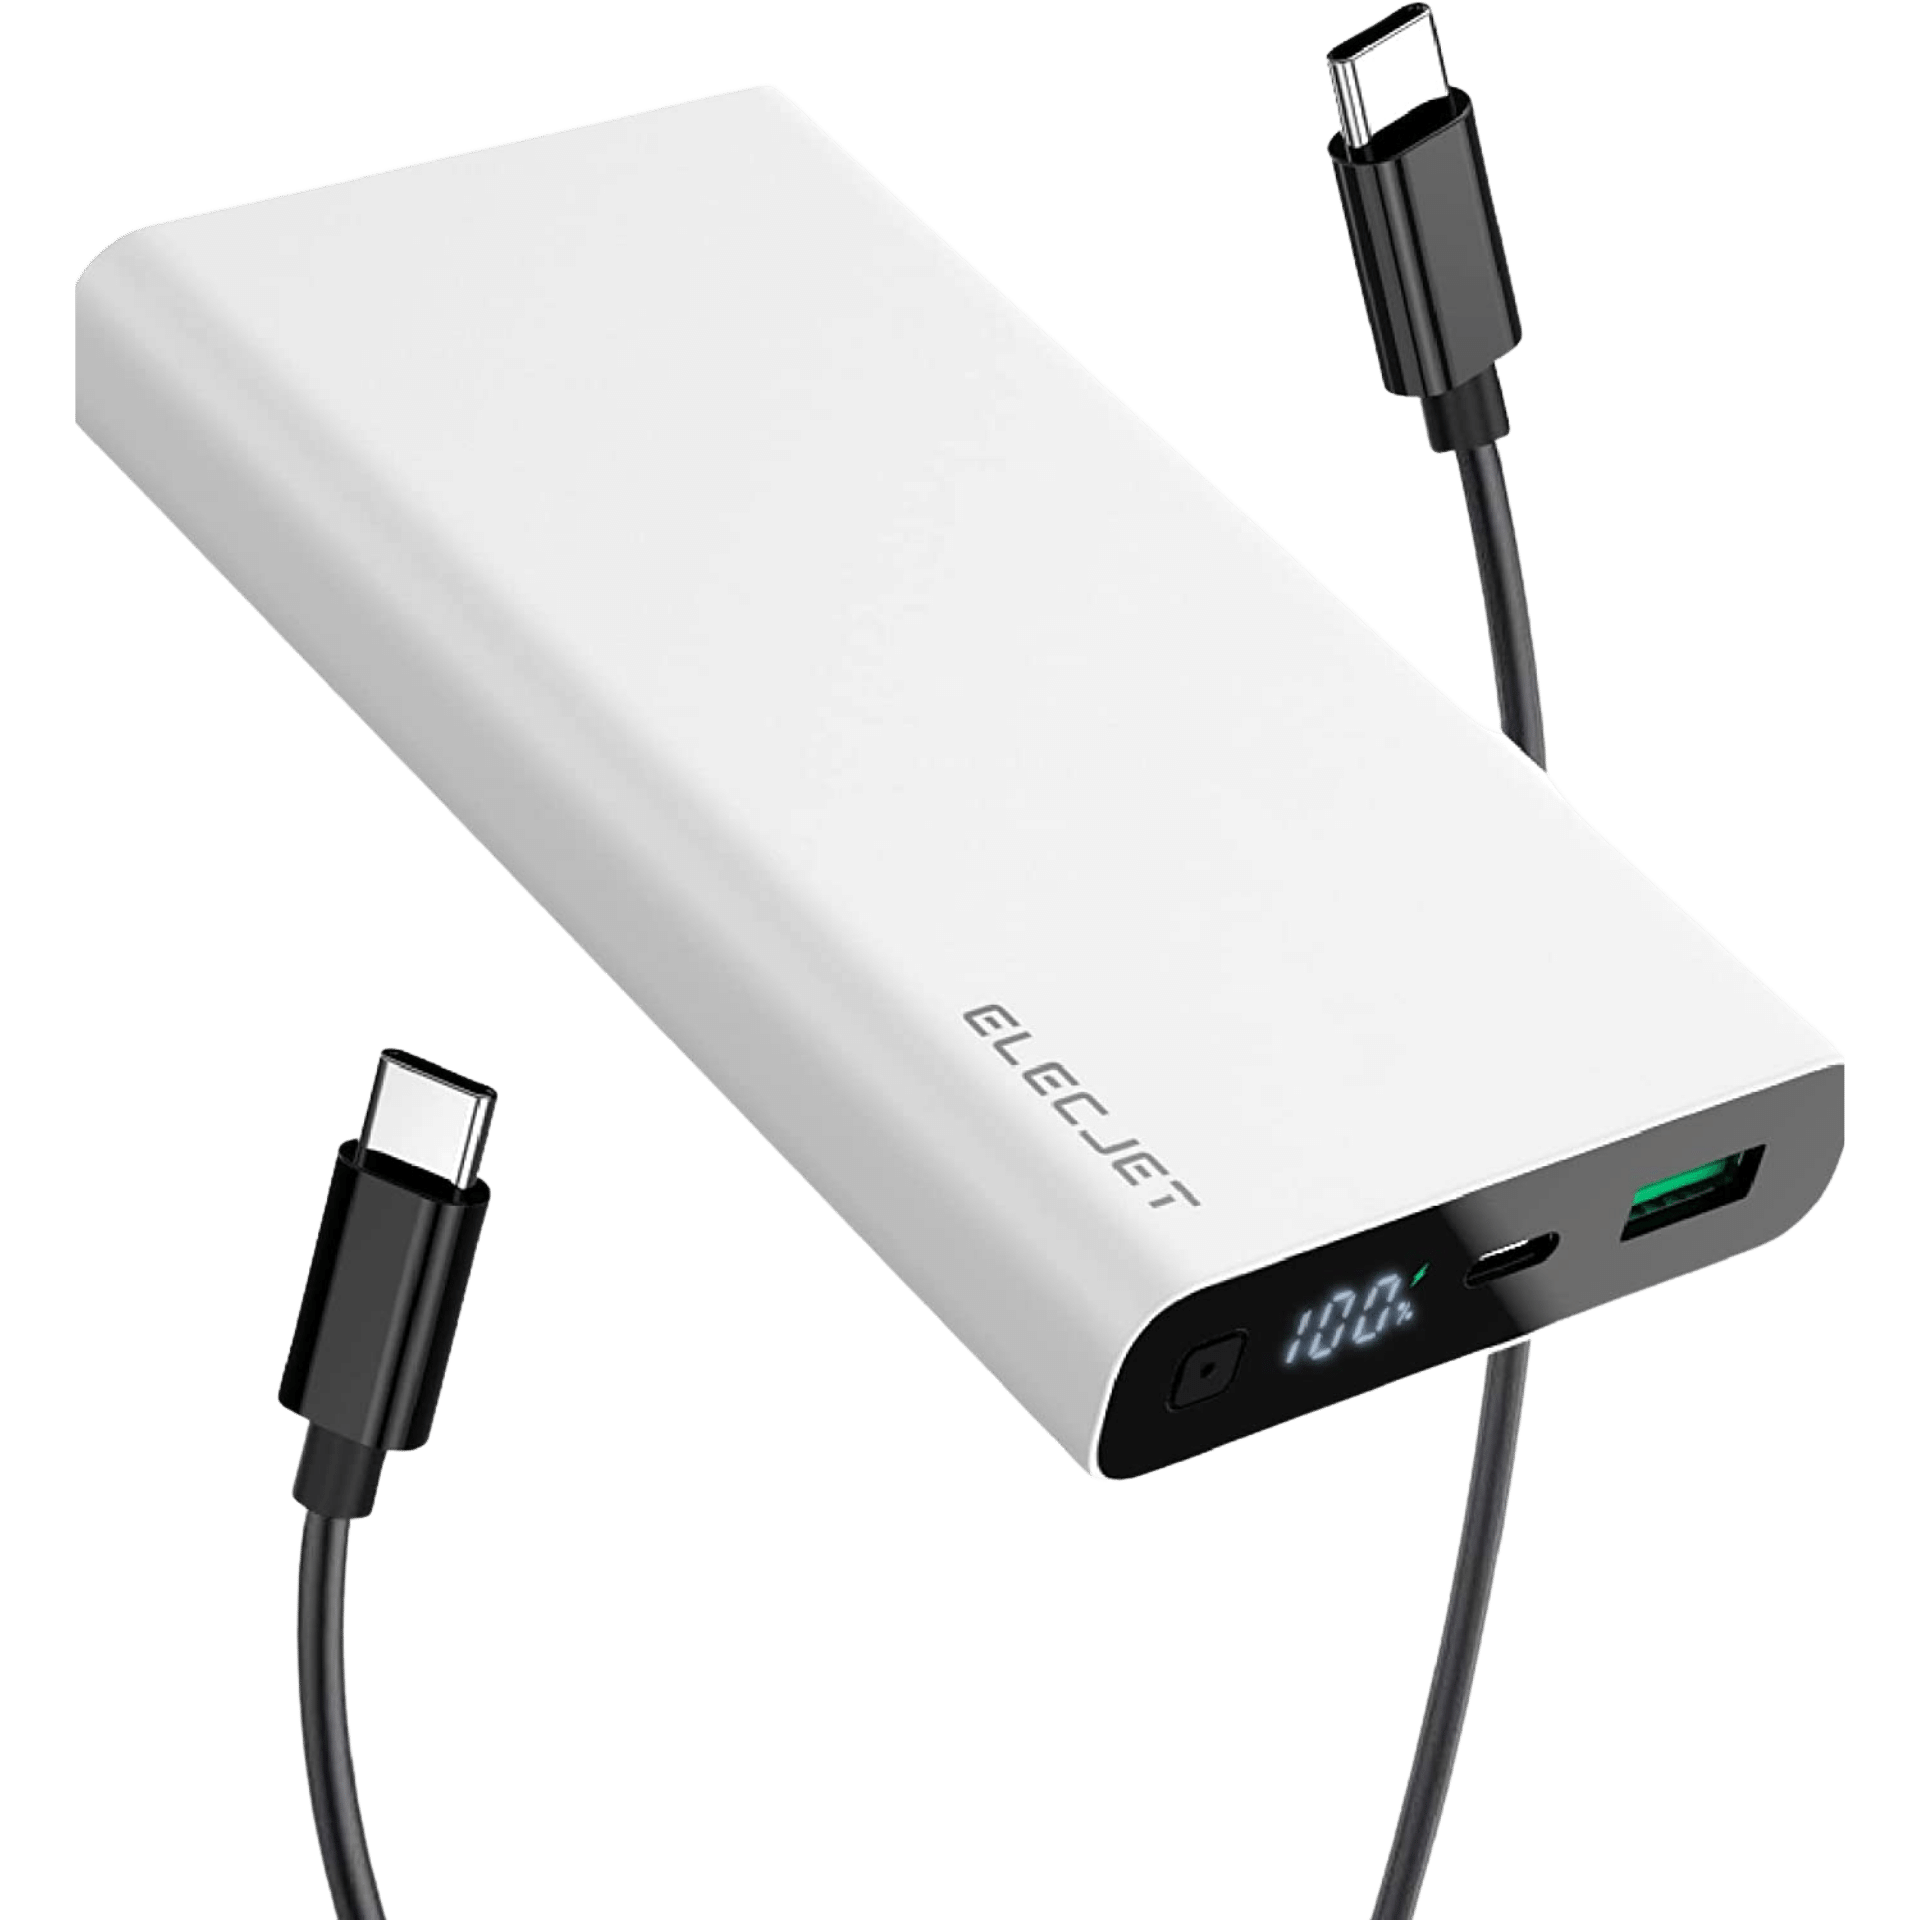 Grab UGREEN's 65W 3-in-1 USB-C charger for just $33